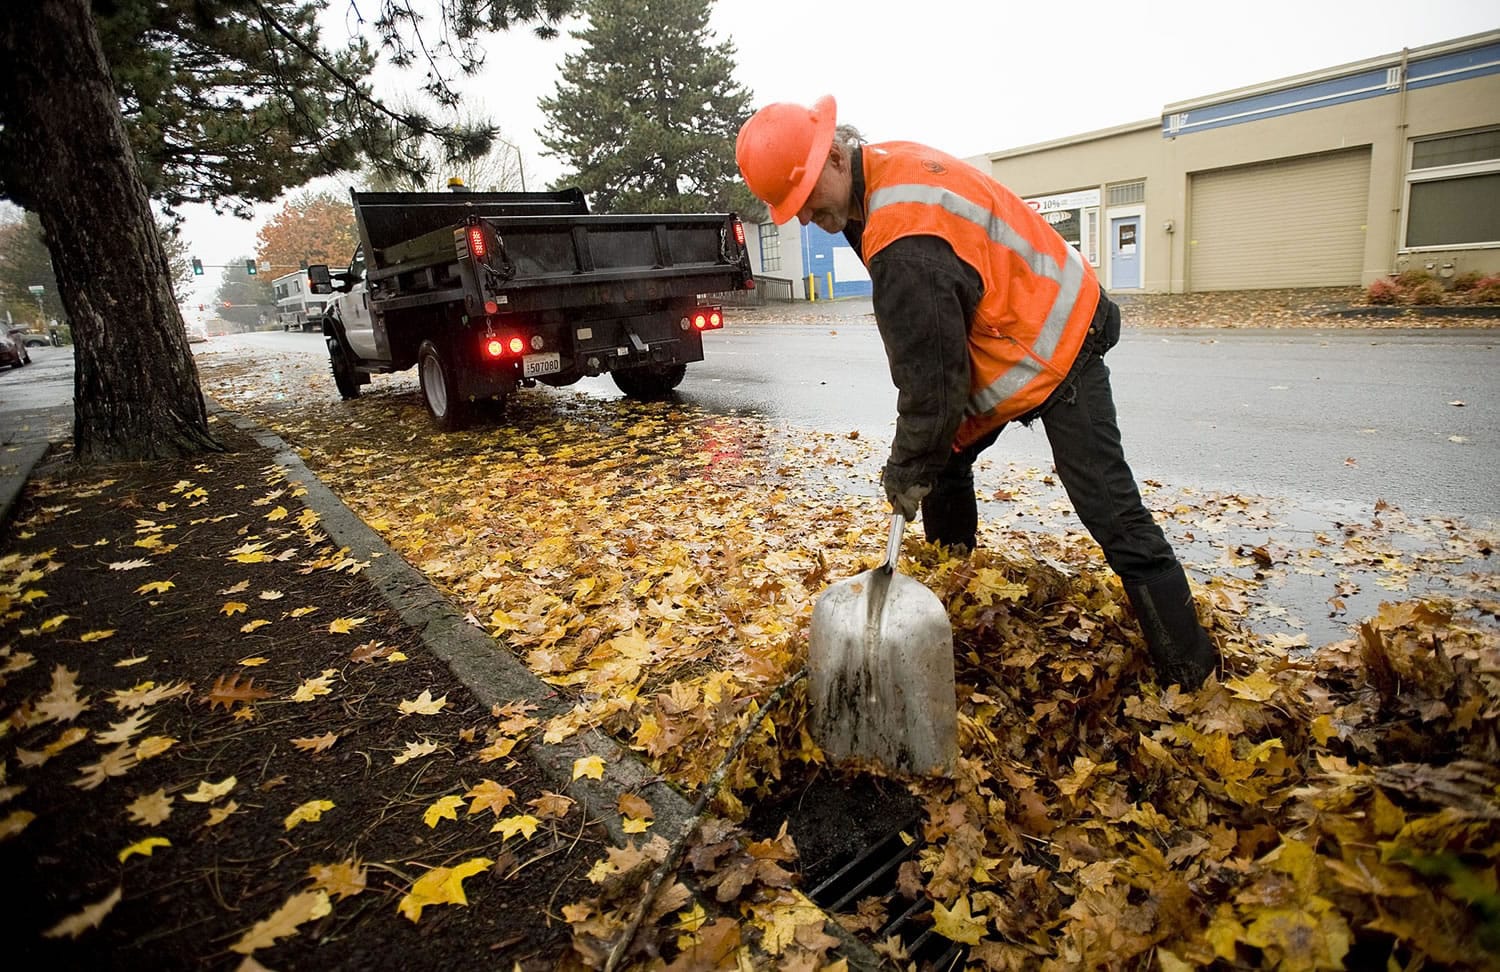 Bill Lamkin, part of the city of Vancouver's stormwater management team, clears leaves from a drain at the intersection of East 15th Street and Broadway in this file photo.